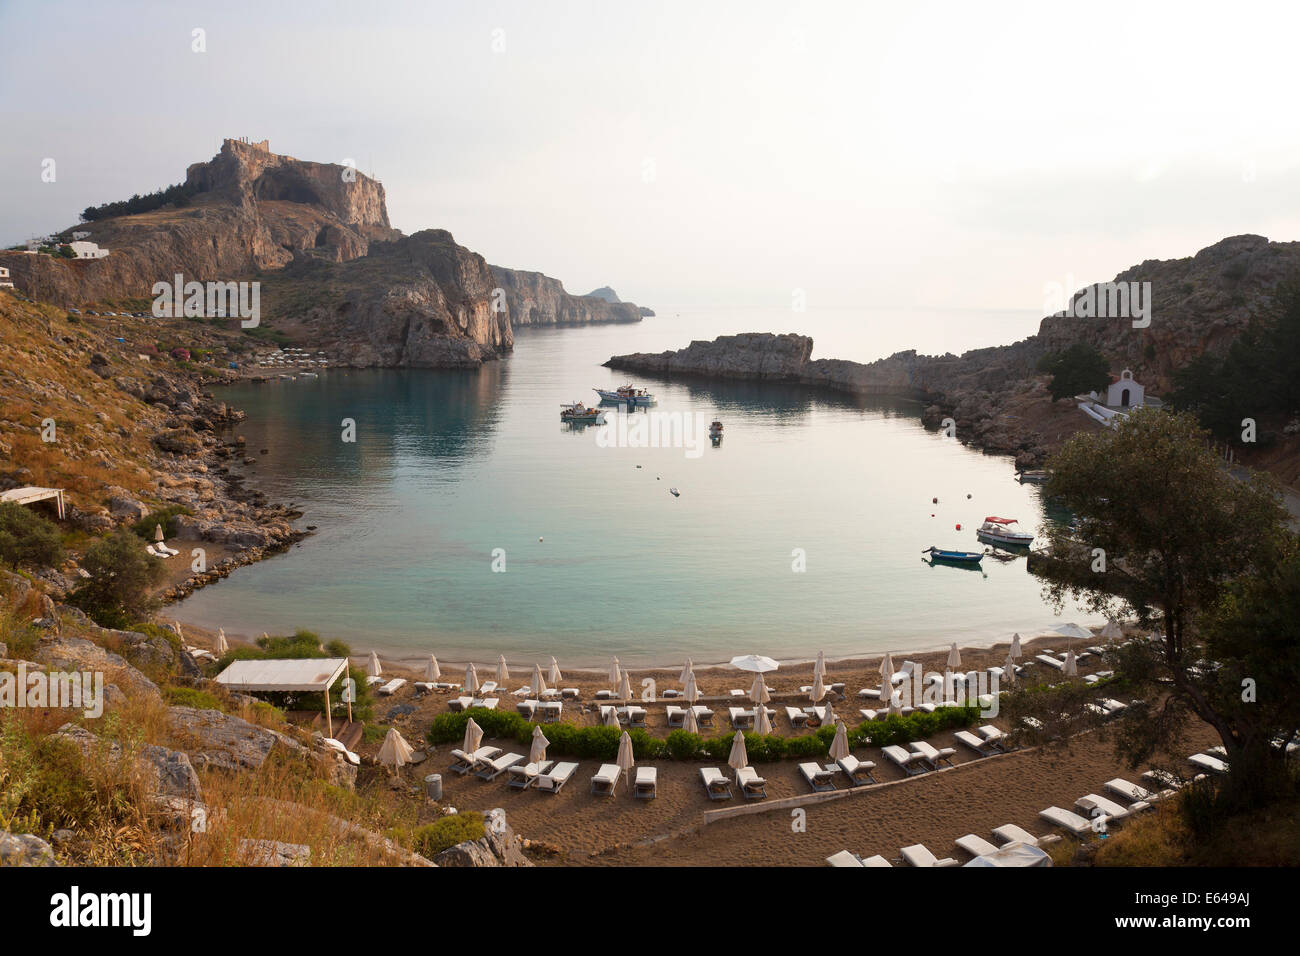 St Pauls Harbour, beach and Acropolis, Lindos Rhodes Greece Stock Photo